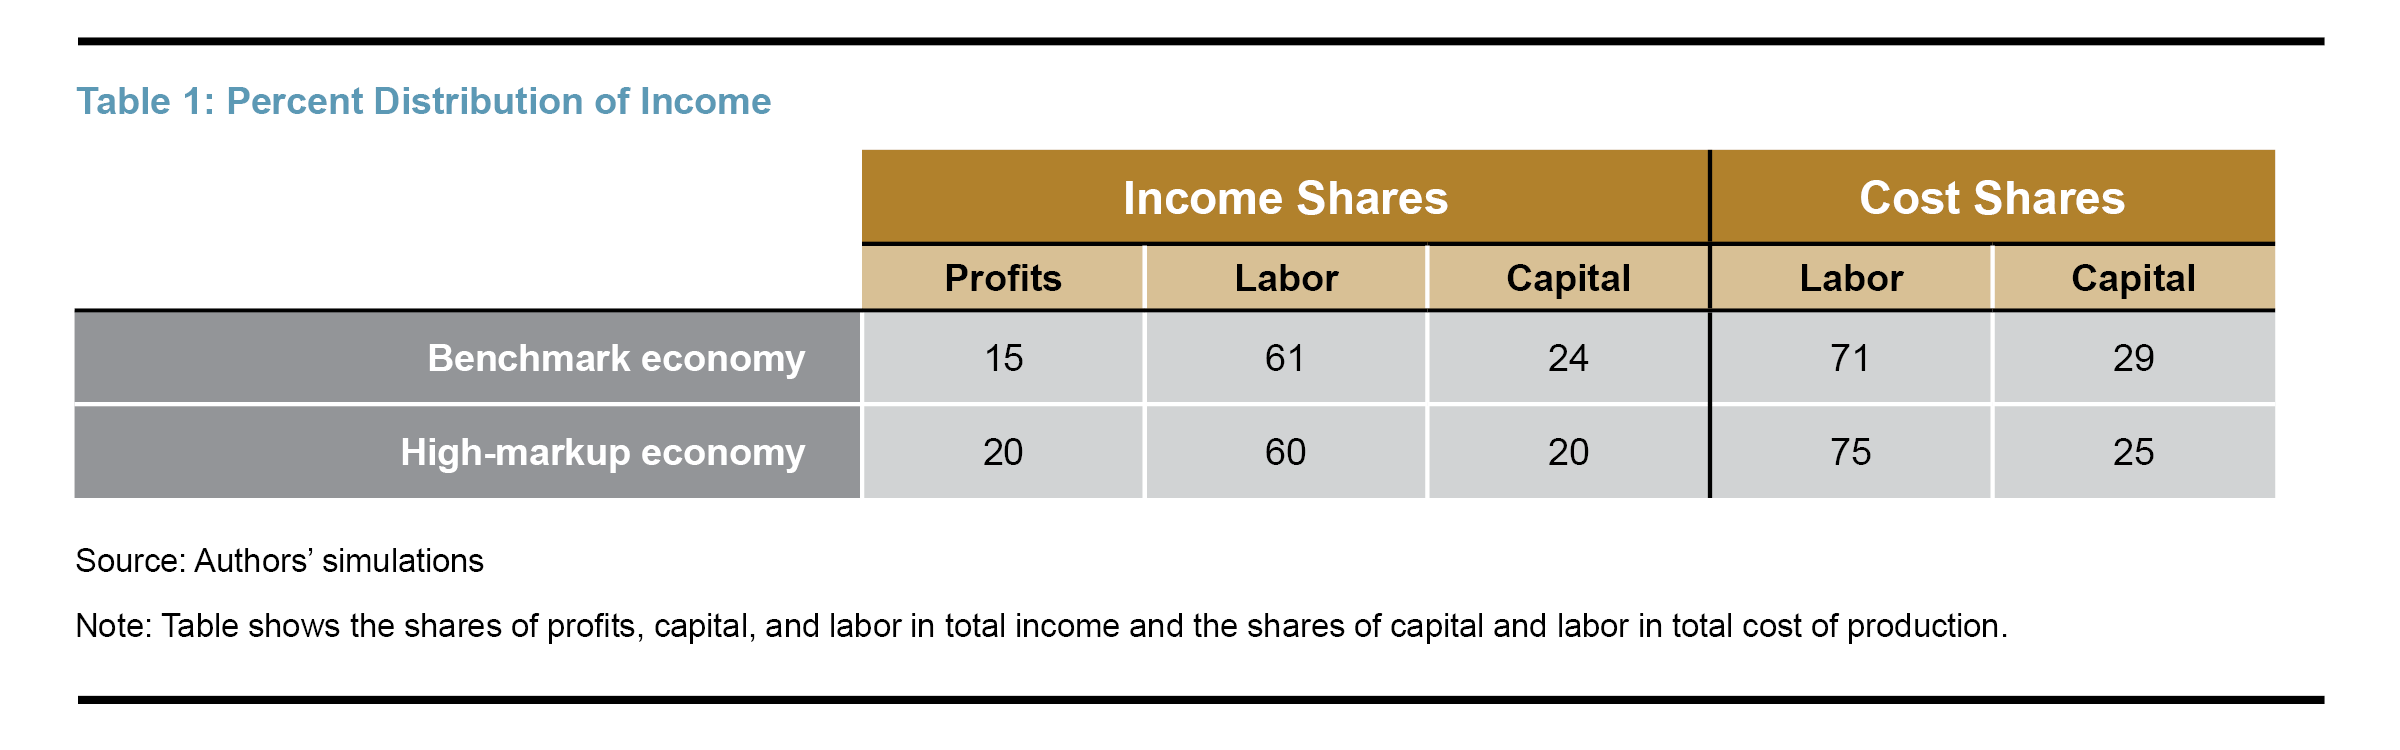 Table 1: Percent Distribution of Income